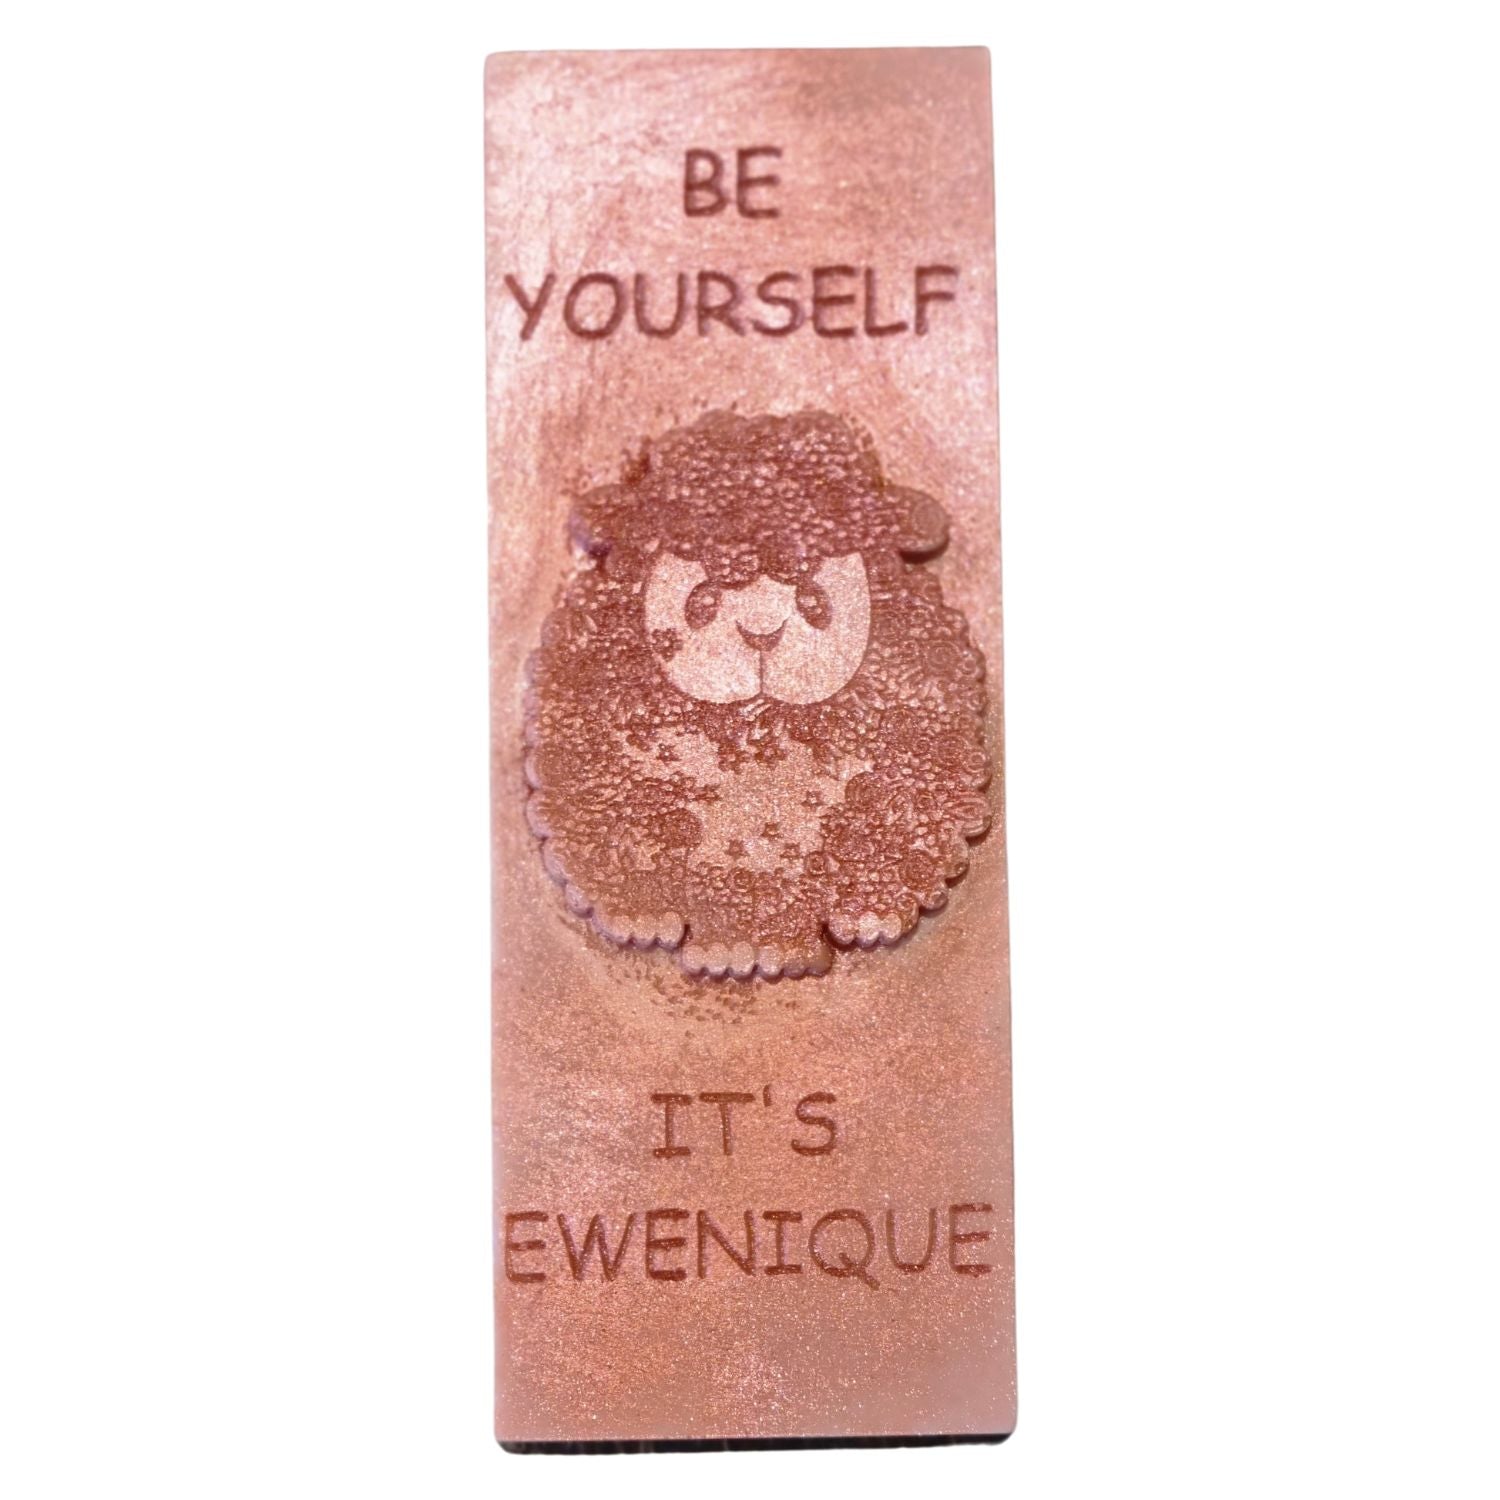 A bronze coloured rectangle of wax with a raised sheep design with the writing be yourself above and it's ewenique below.